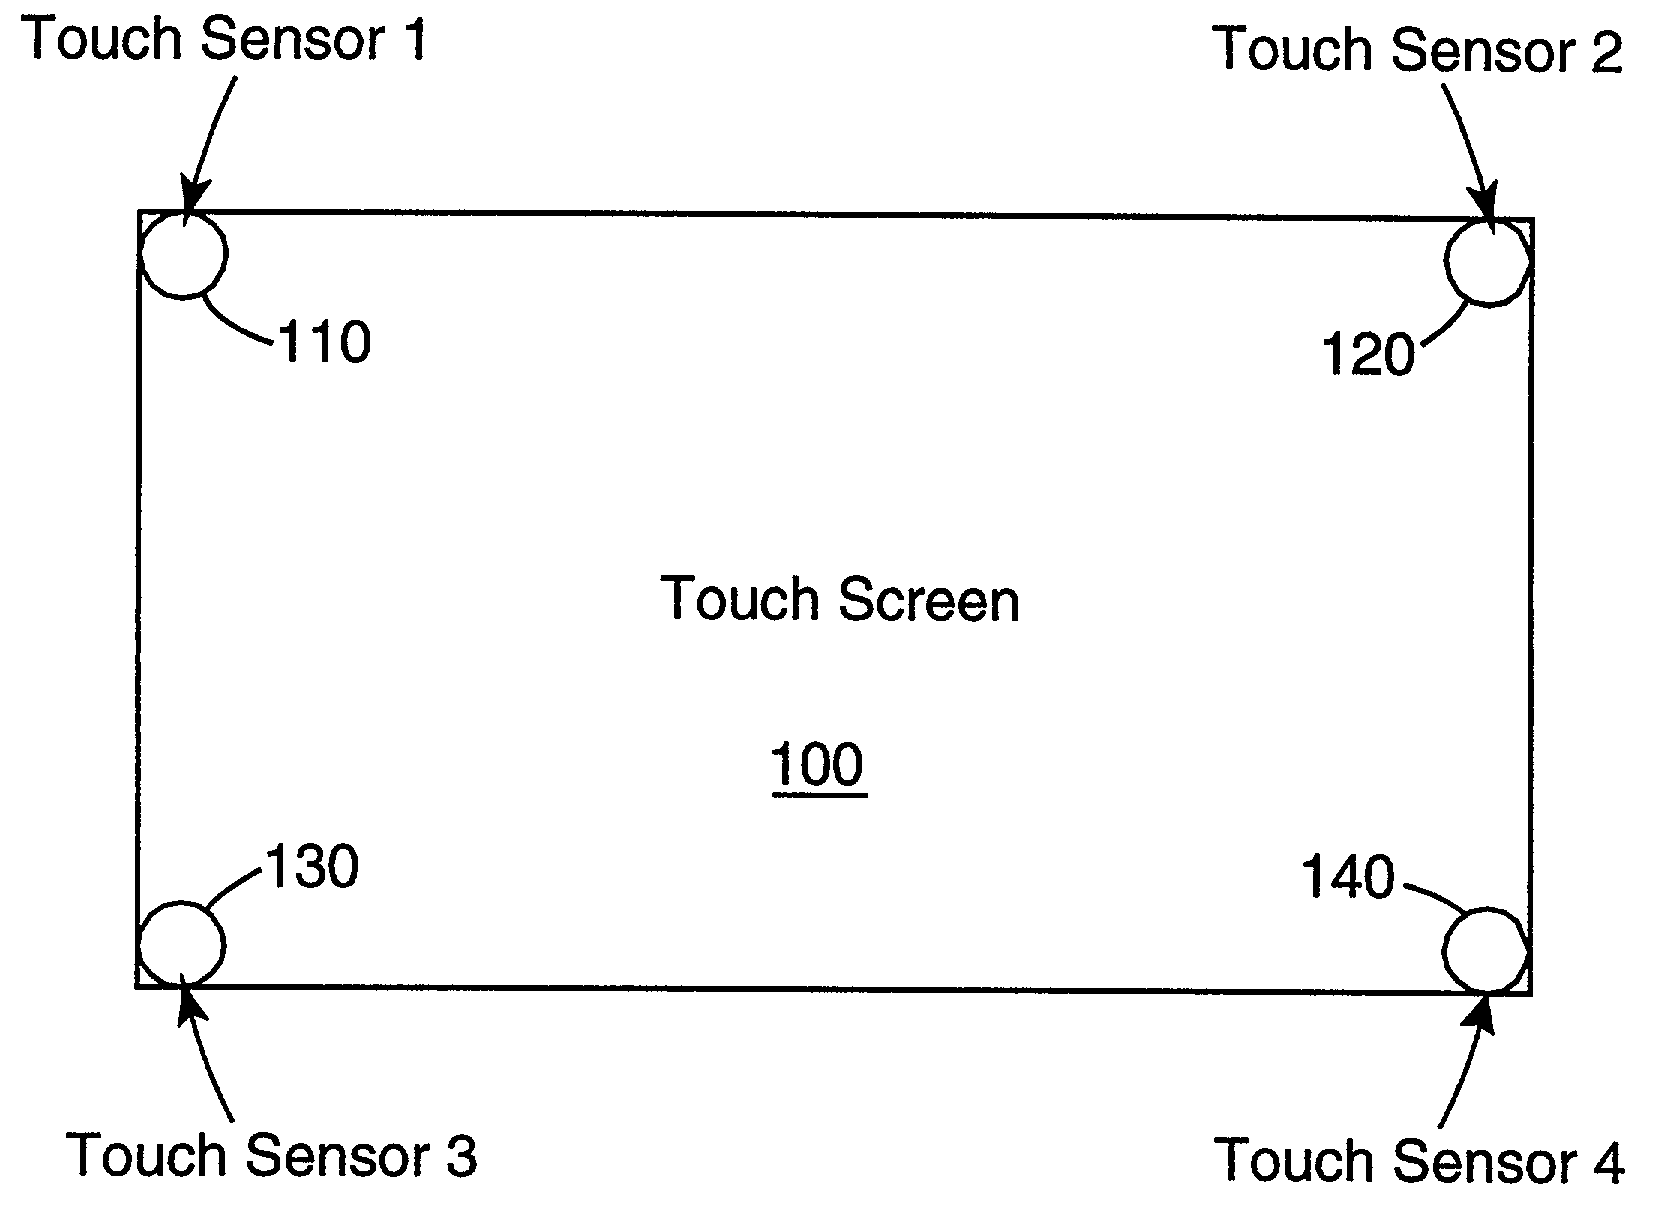 Correction of memory effect errors in force-based touch panel systems